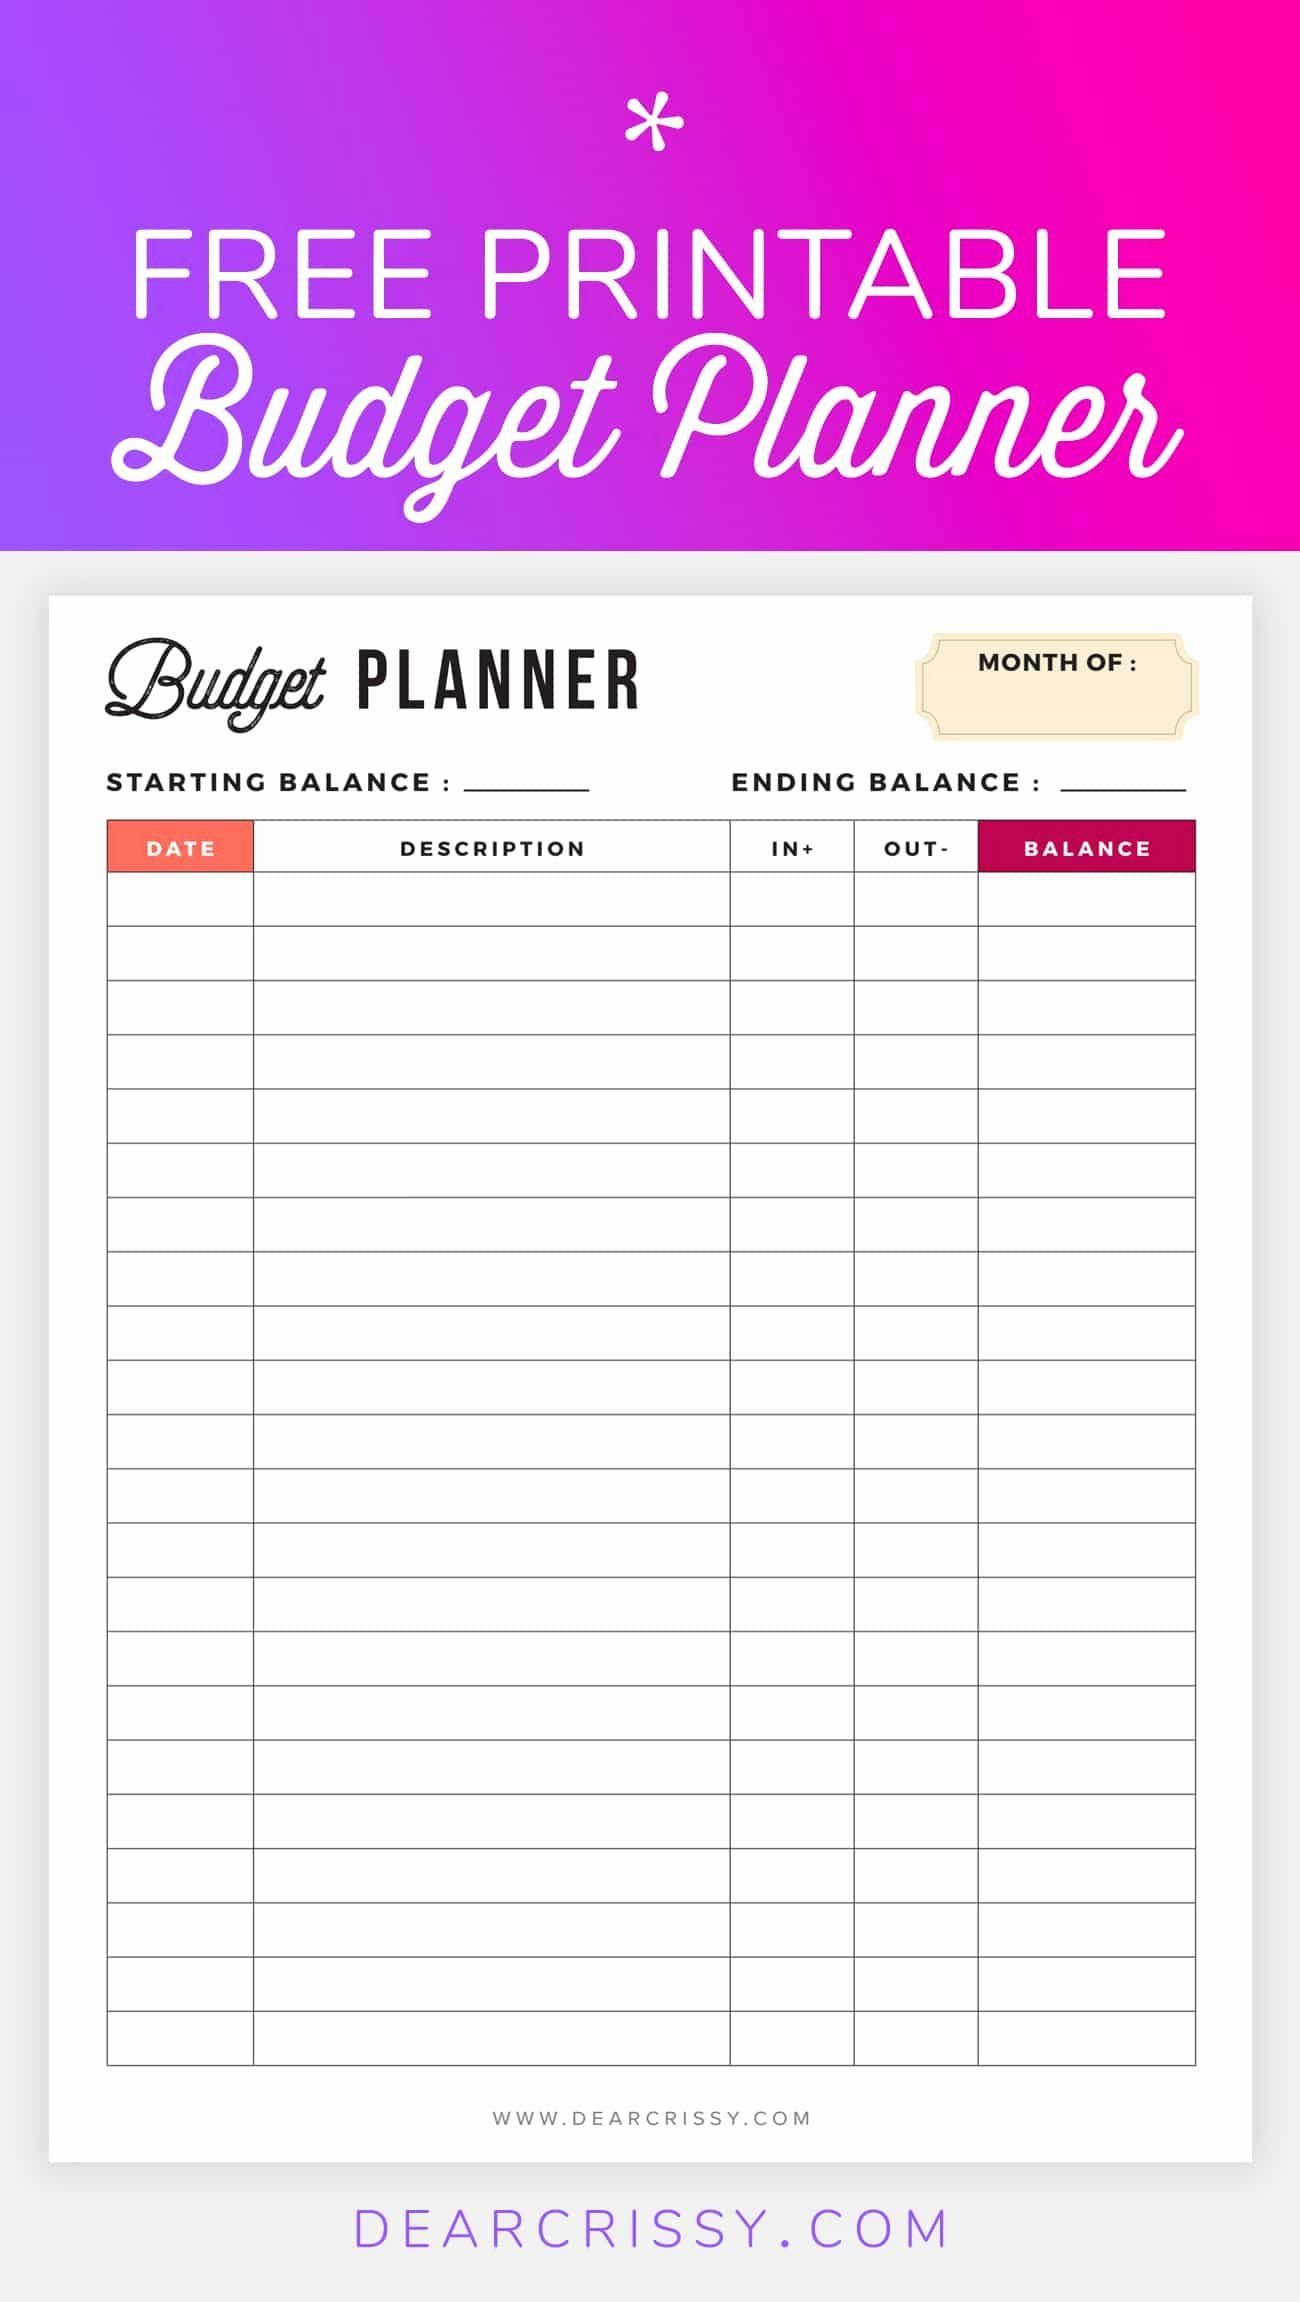 Monthly Budget Planner Template Lovely Free Bud Planner pertaining to Budget Planning Spreadsheet Templates